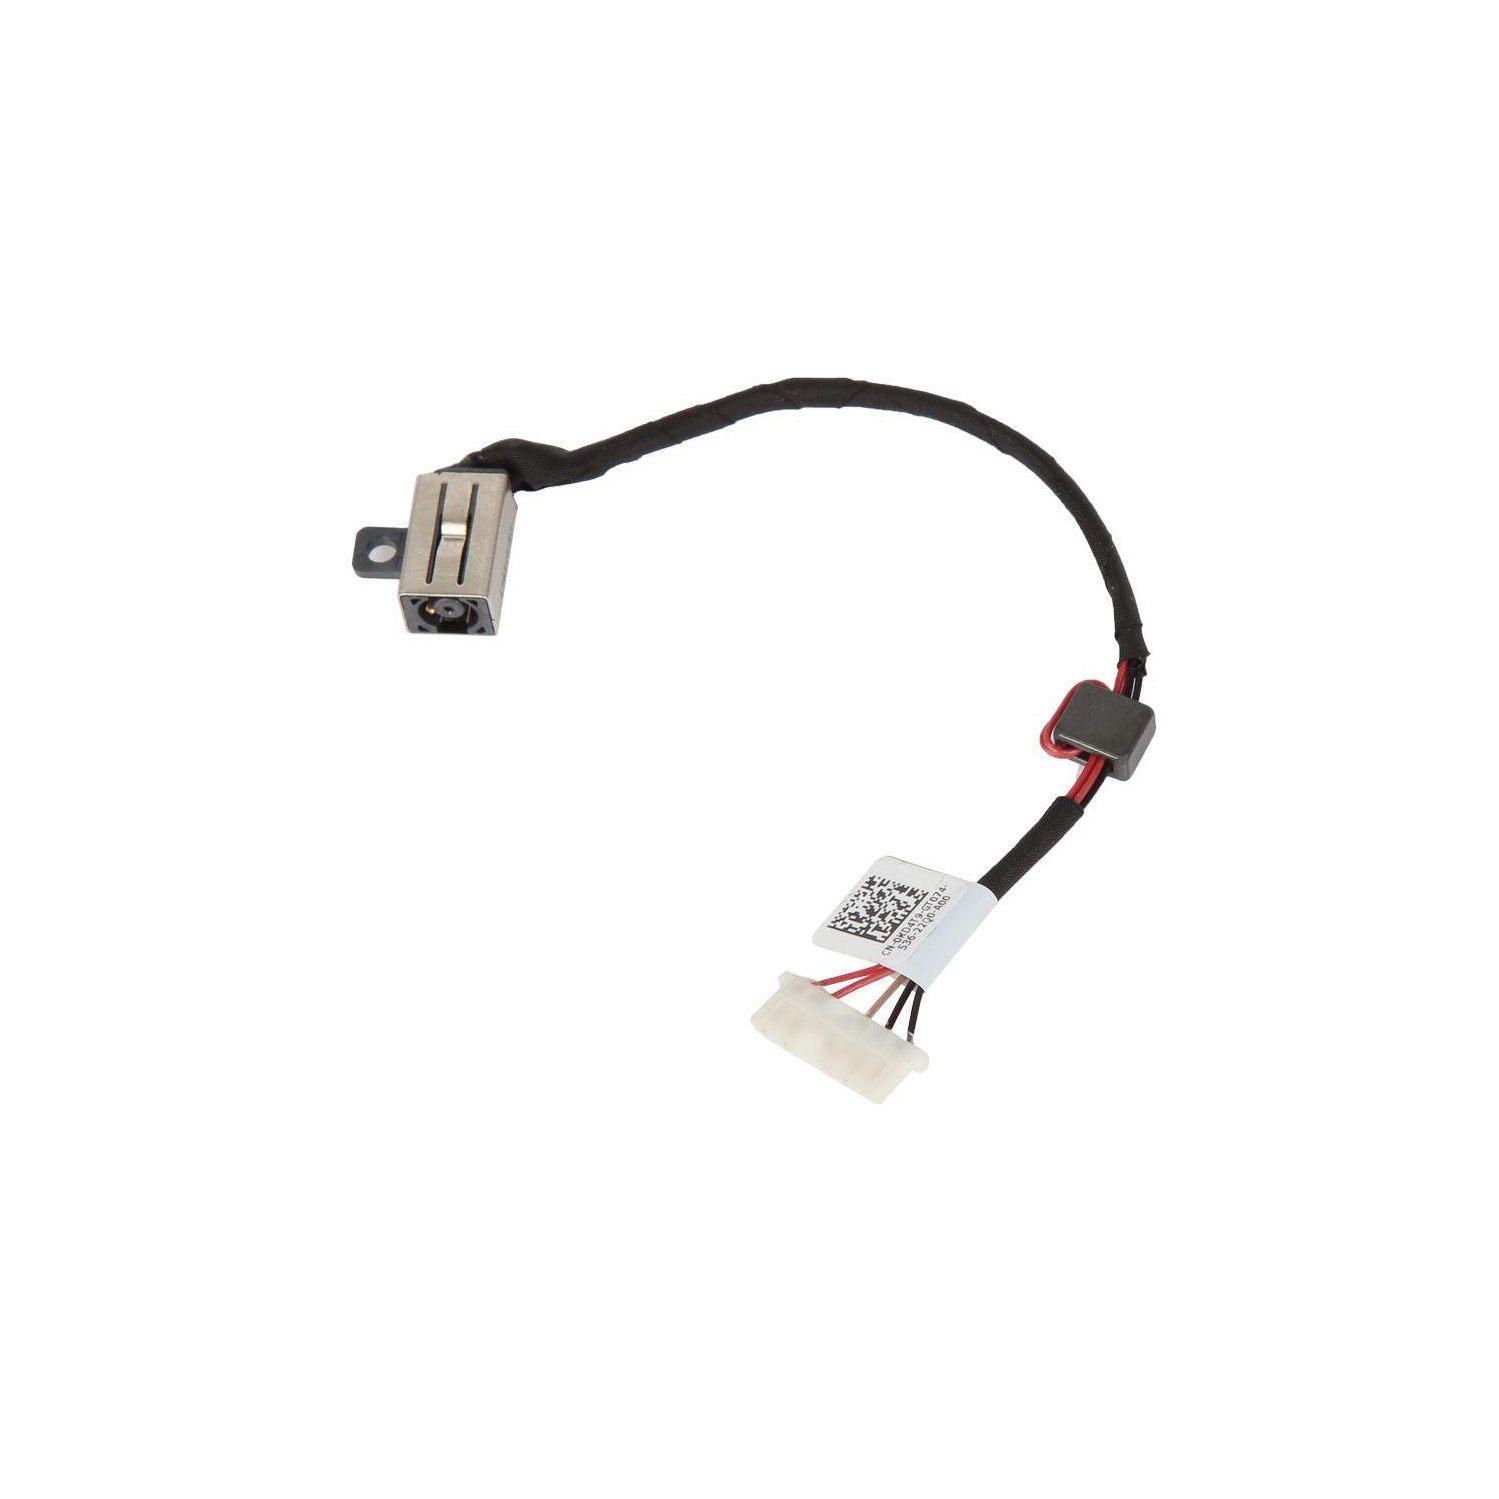 New Genuine Dell Inspiron 15 15-5000 15-5555 15-5558 15-5559 DC Jack Cable DC30100UD00 KD4T9